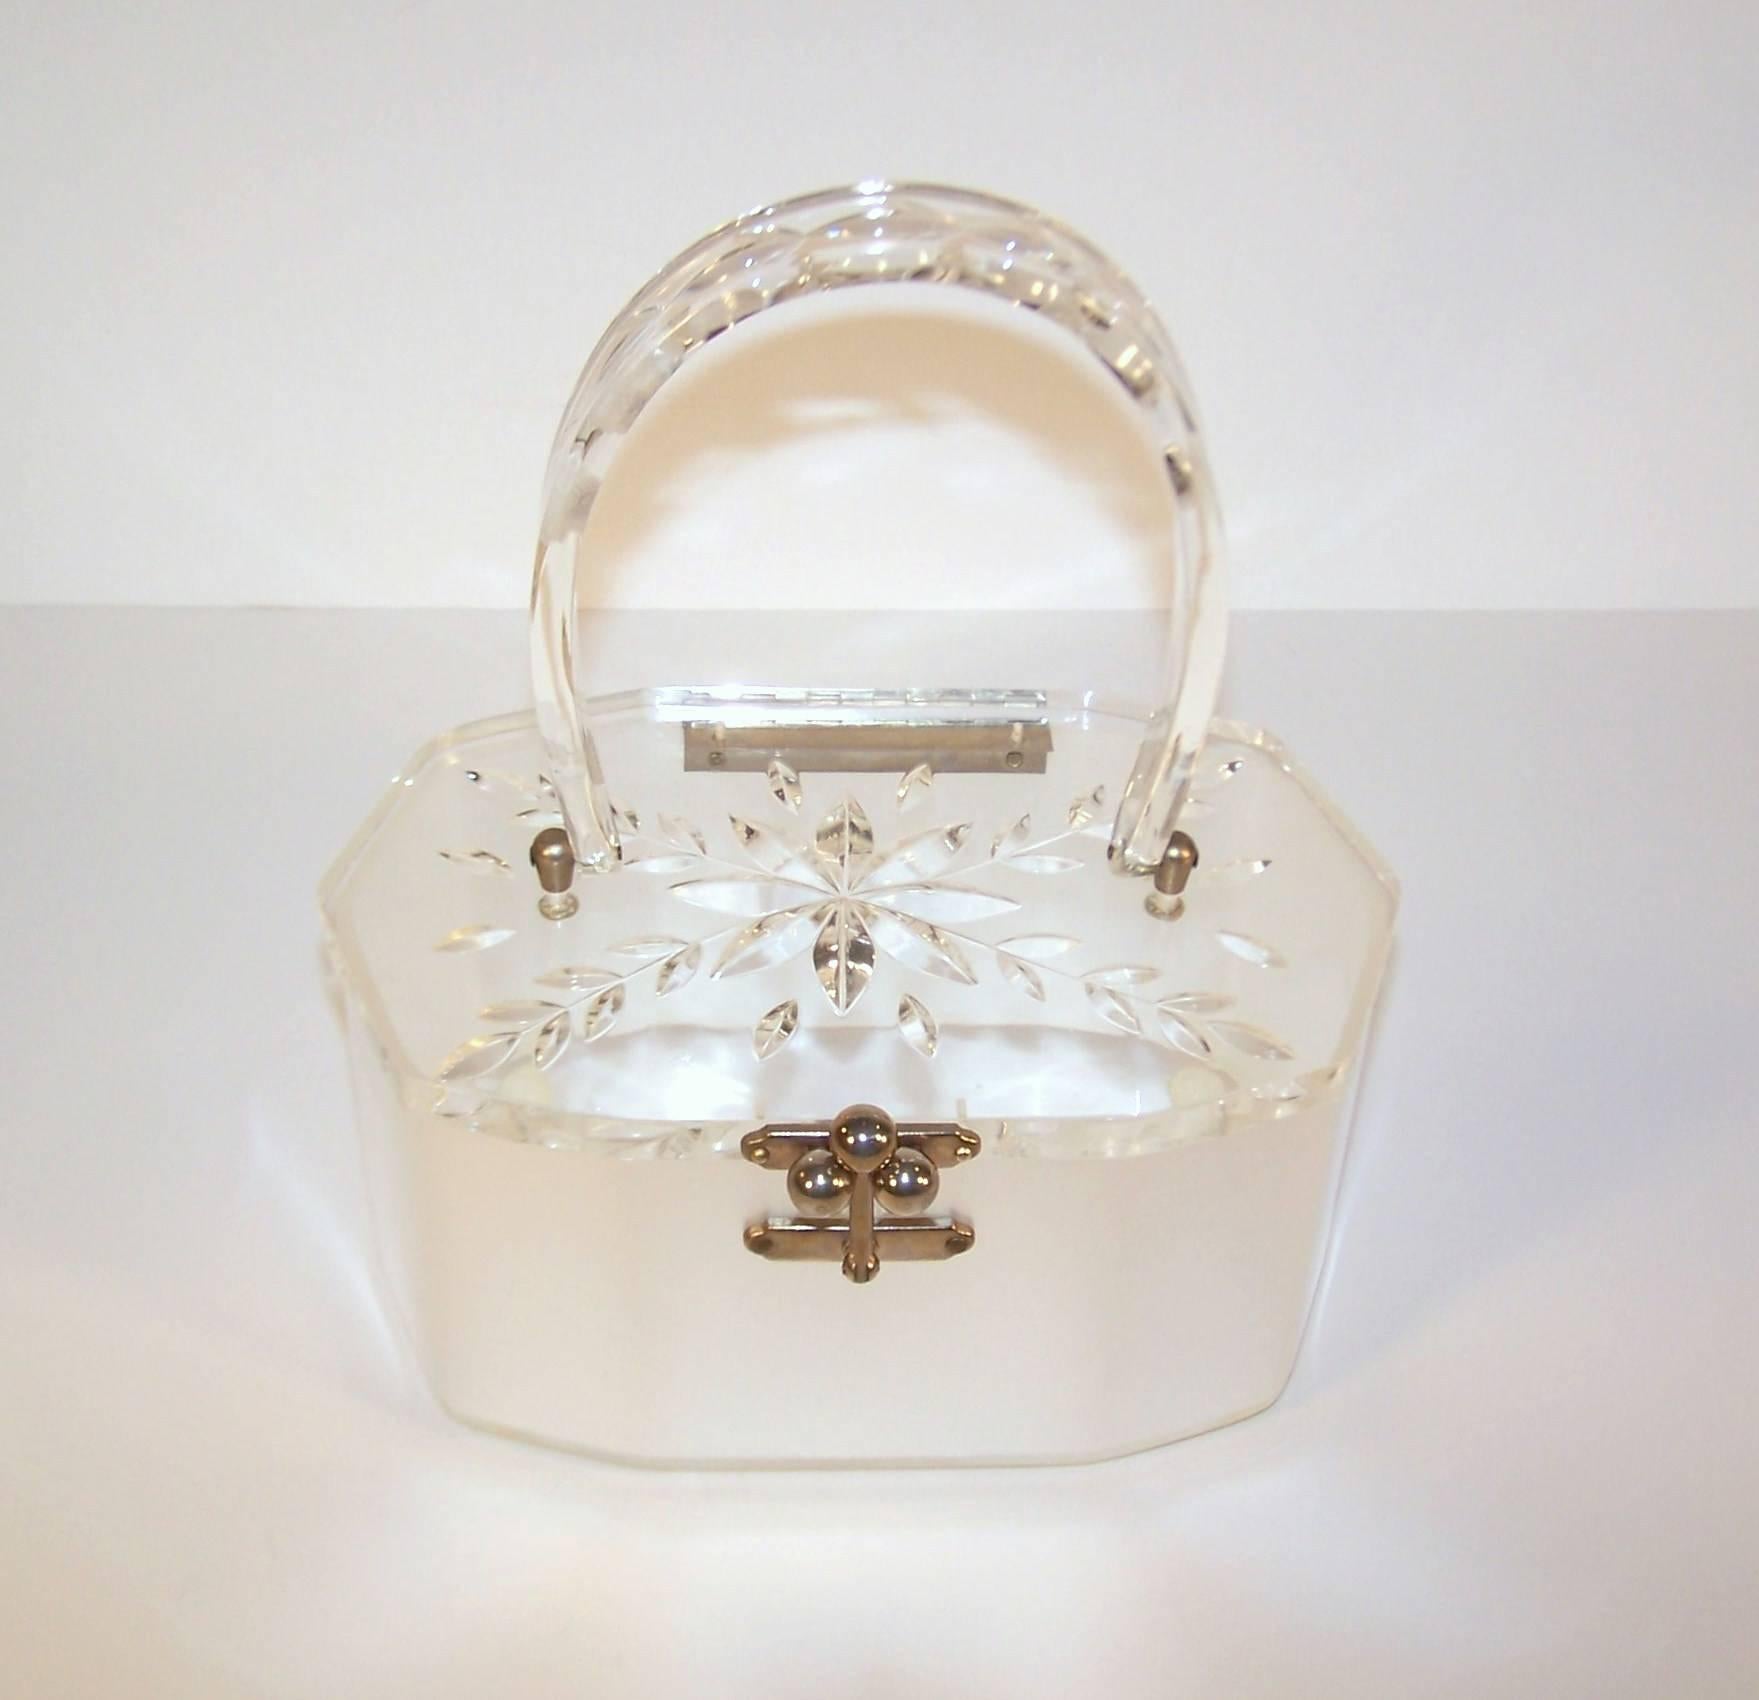 Perfect for a modern day Cinderella!  This classic 1950's lucite handbag has a hand carved clear lid and handle with a pearly white sateen body.  The 10-sided boxy shape has a three ball closure that securely snaps in place.  Fashionable ladies in